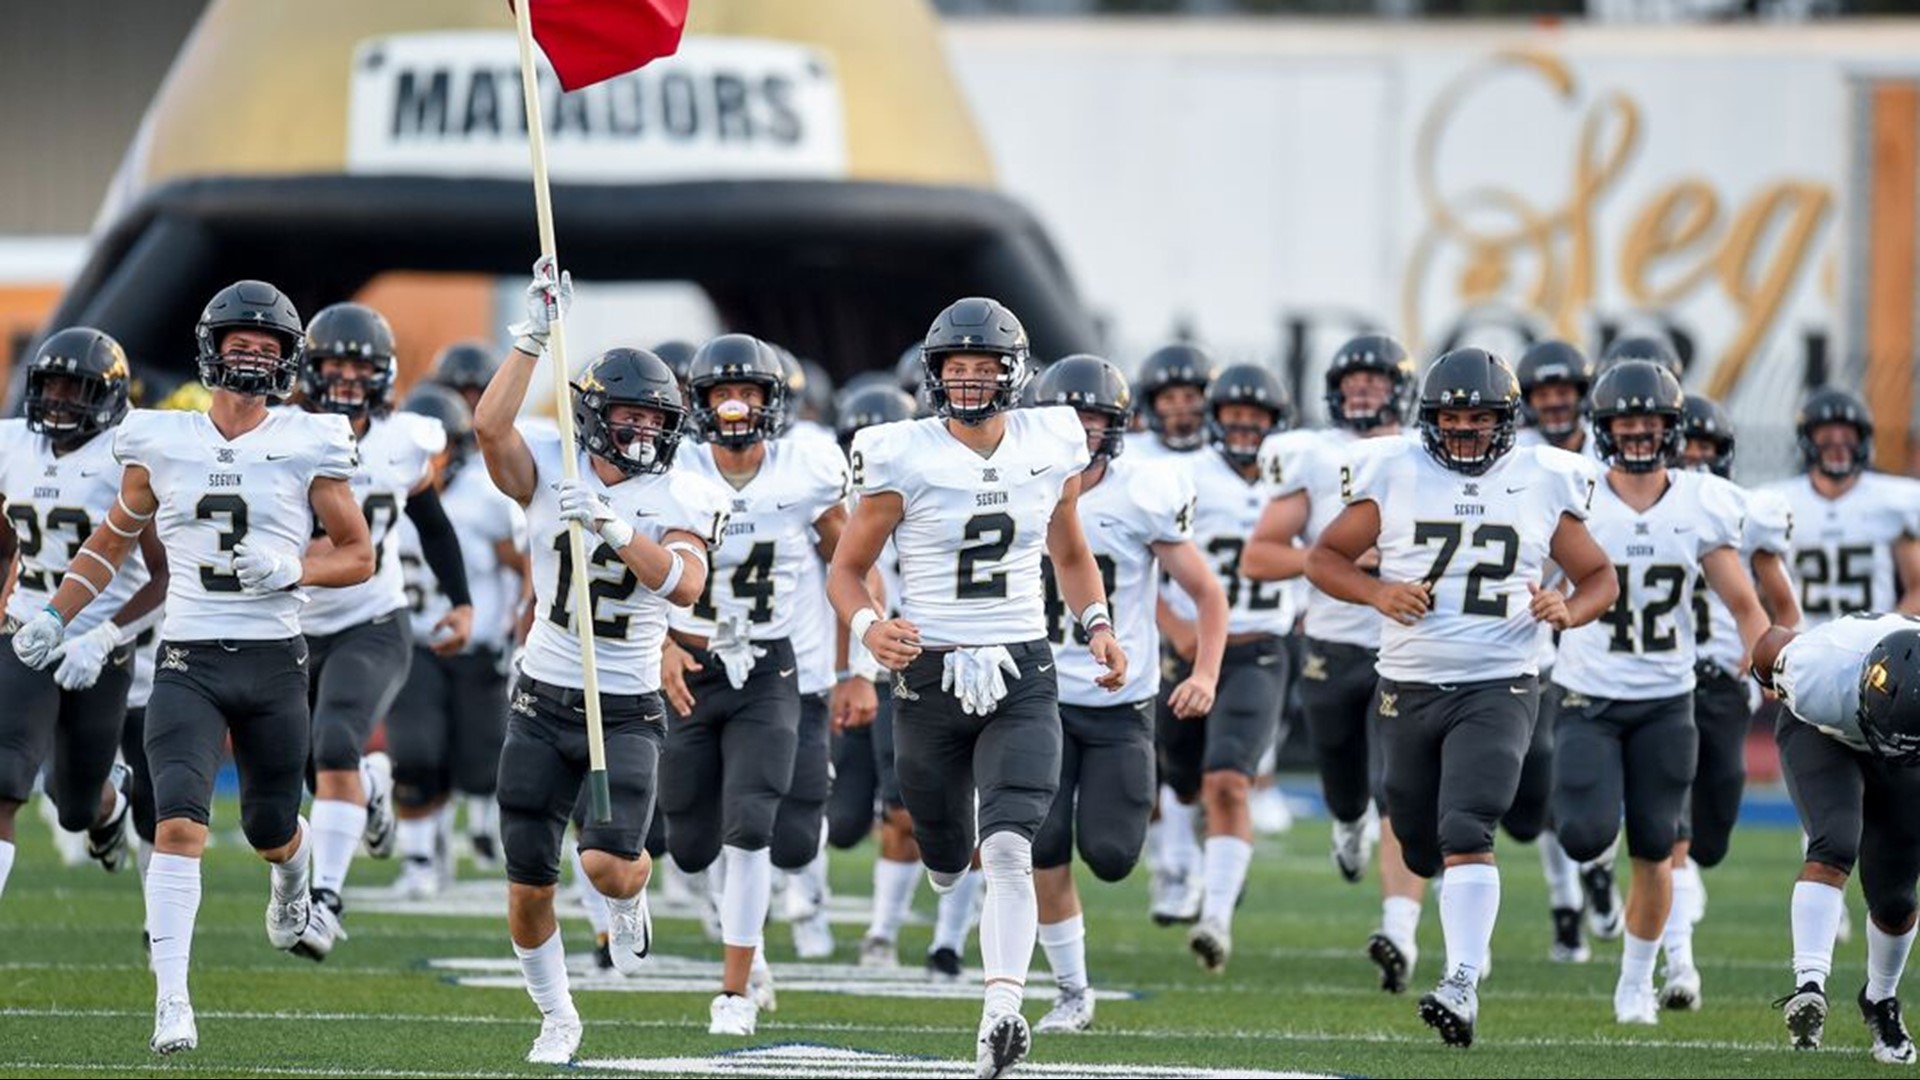 The Seguin Matadors are coming off their first playoff appearance in a while, but play in a district with some good teams.